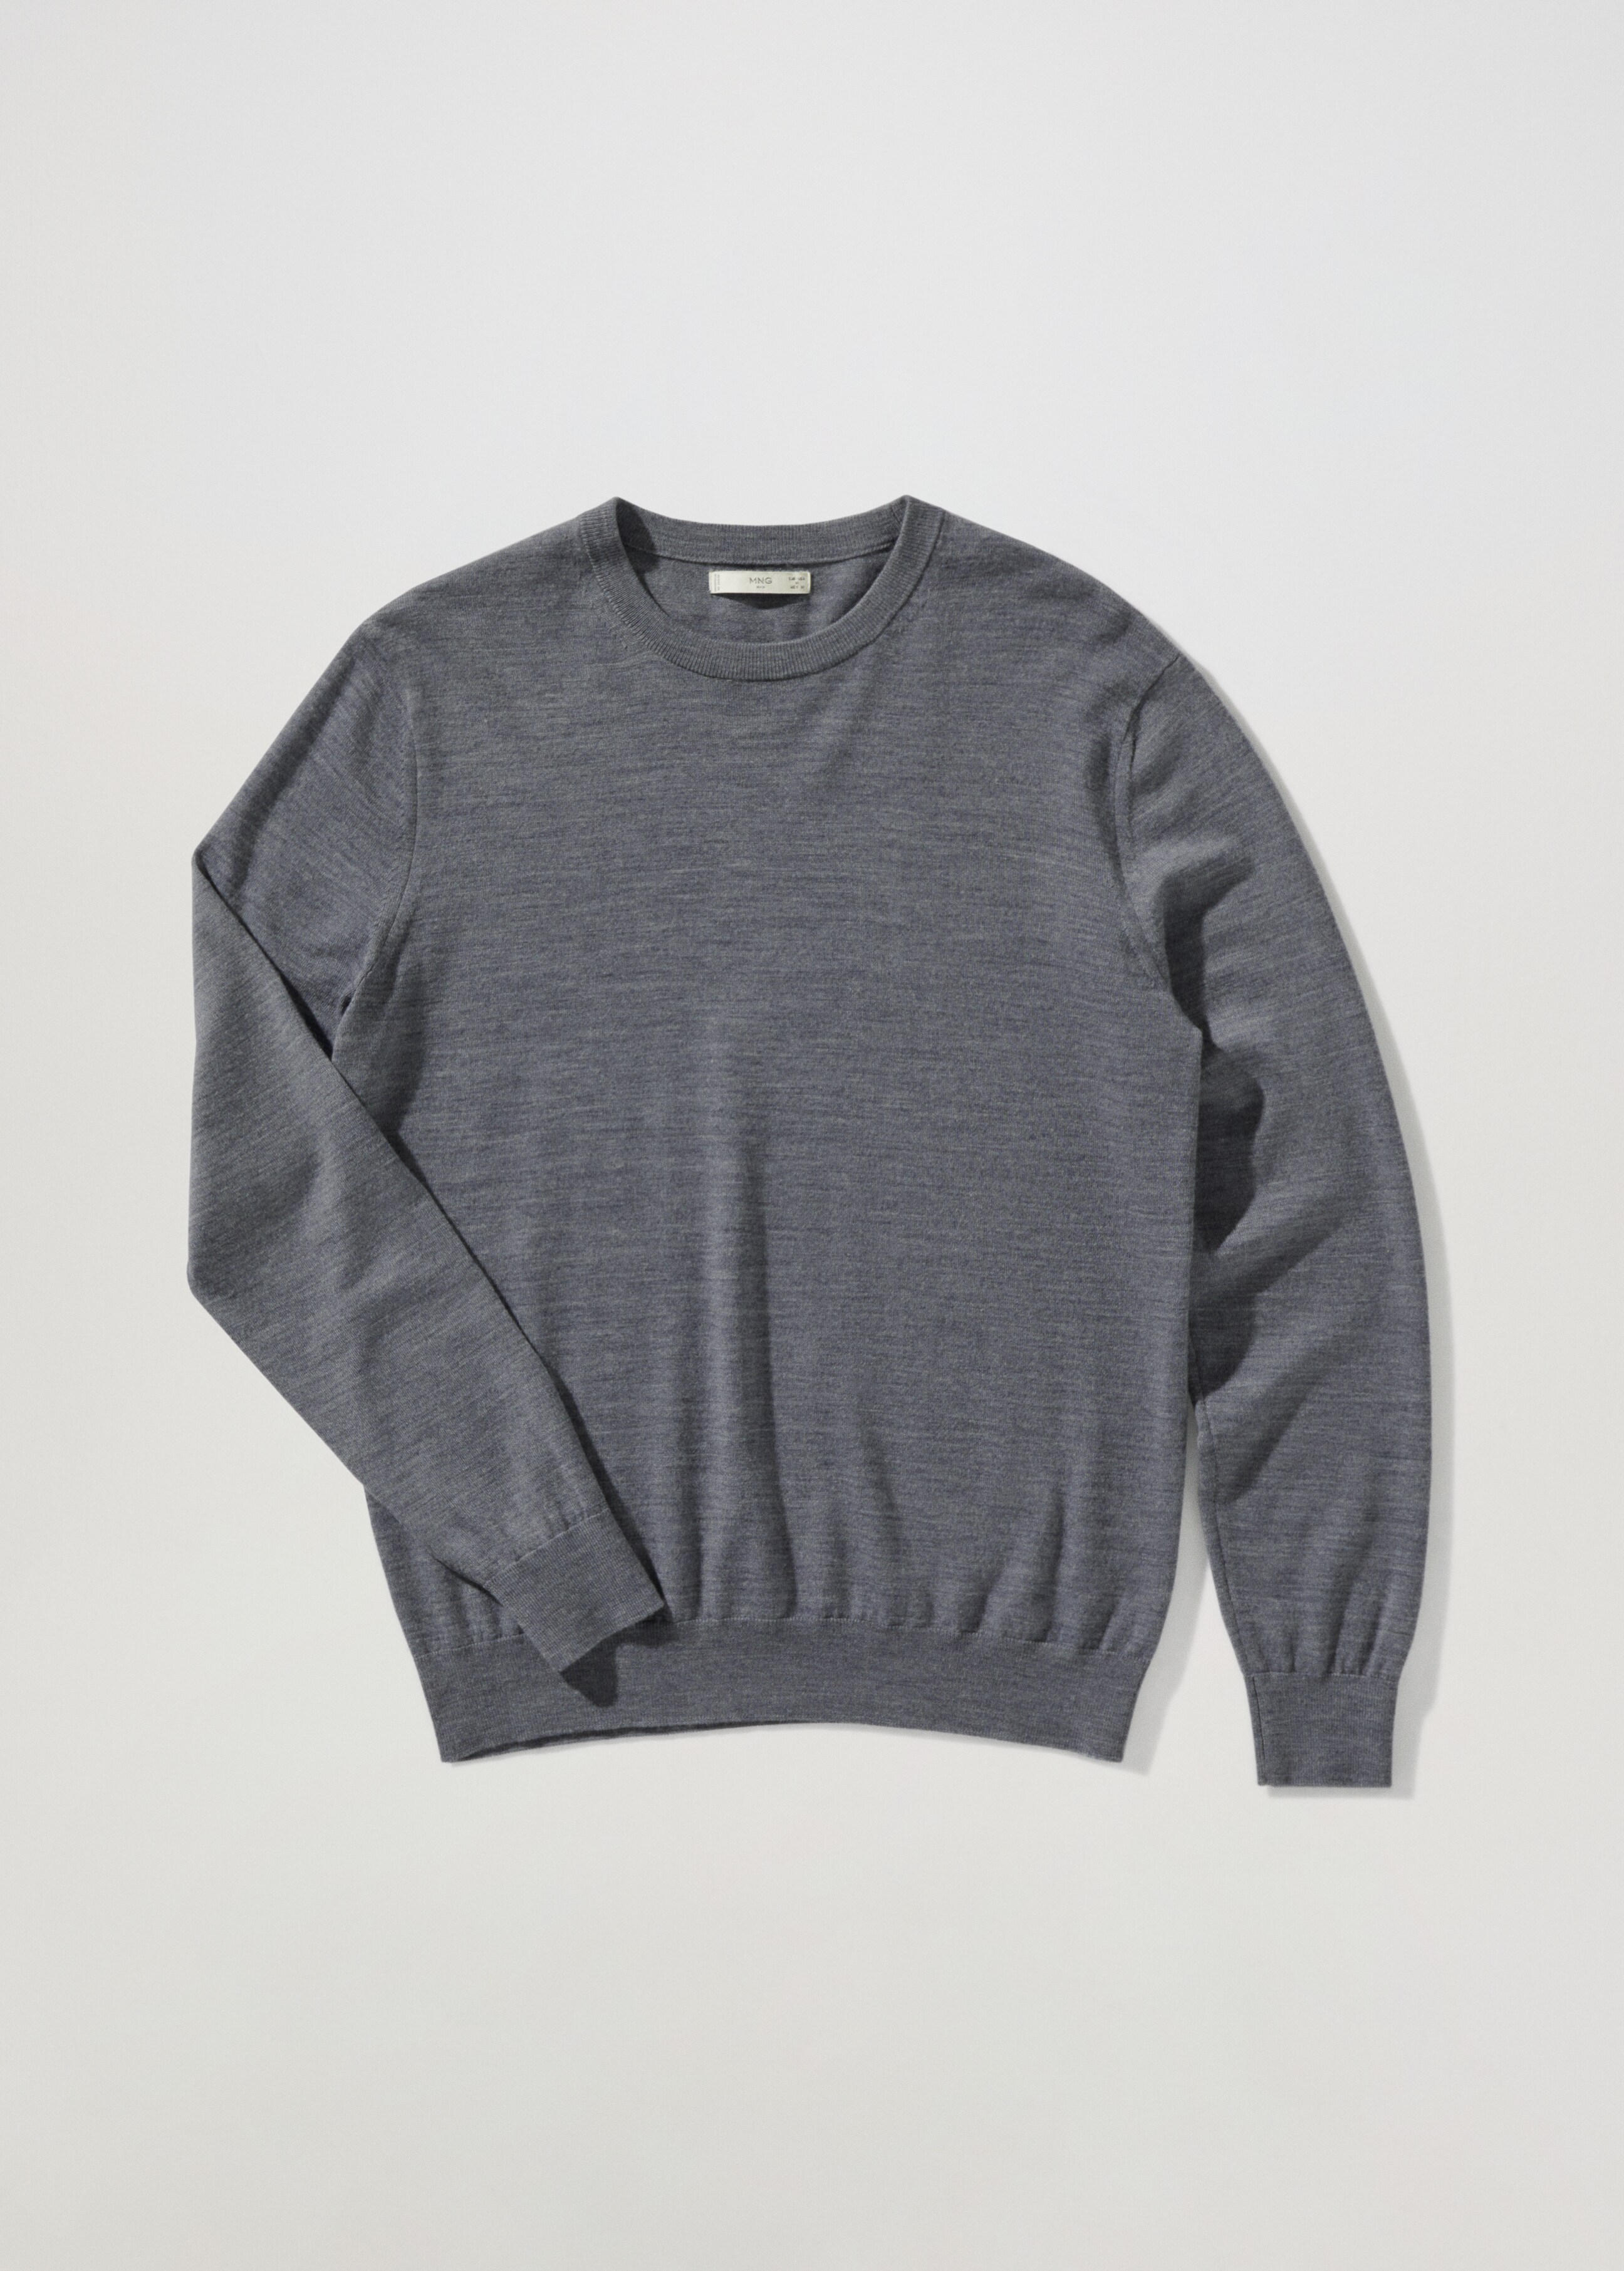 Merino wool washable sweater - Article without model